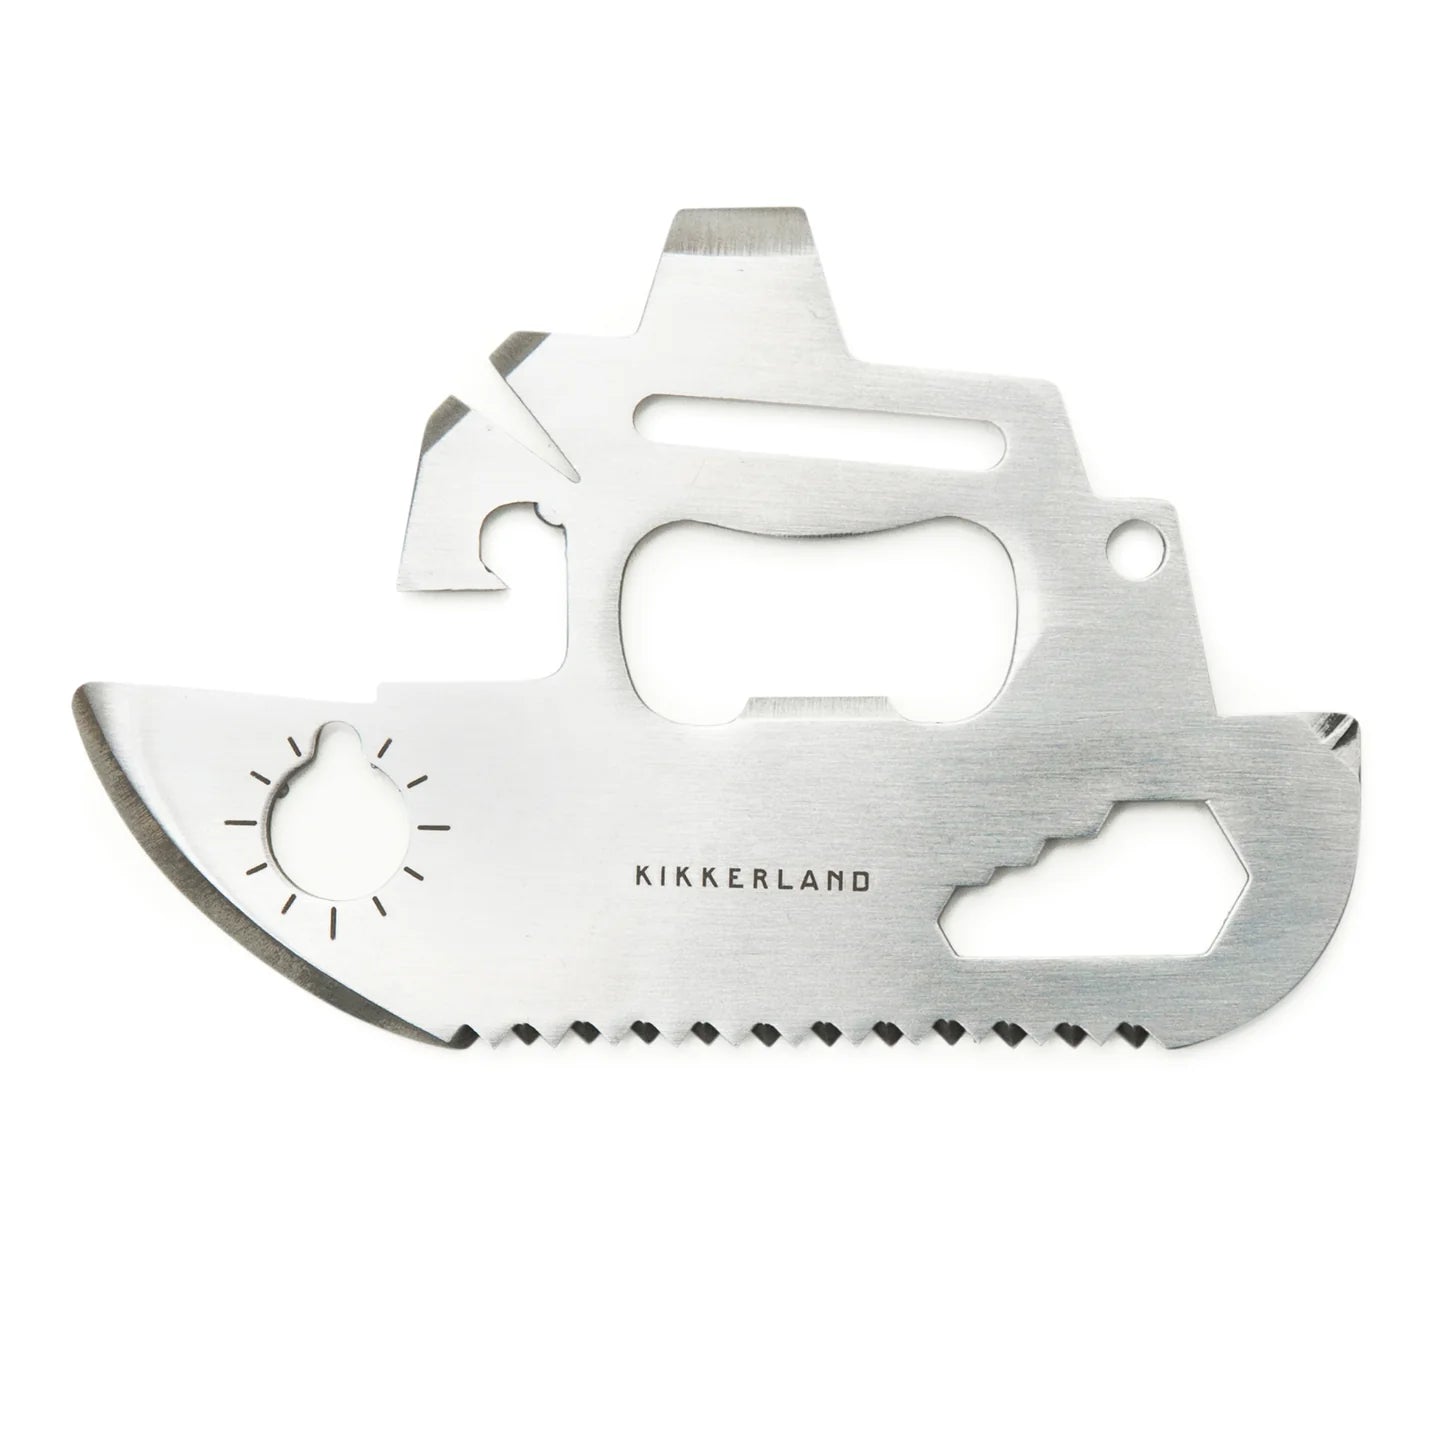 Fab Gifts | Kikkerland Boat Multitool by Weirs of Baggot Street